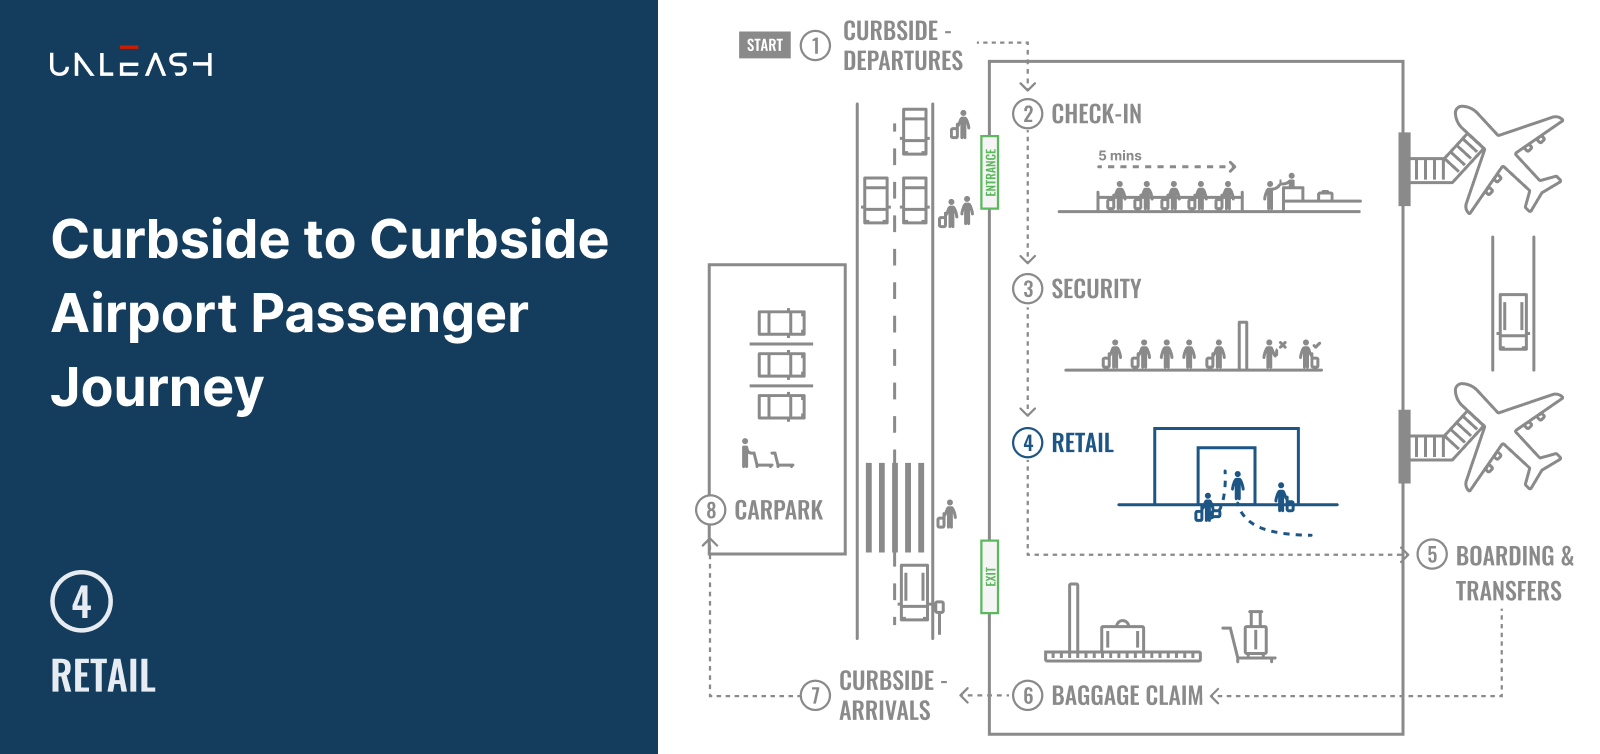 Featured image: Curbside to Curbside Airport Passenger Journey - Part 4 Retail - Read full post: Computer Vision for Airport Operations Series - Part 4, 'Retail'